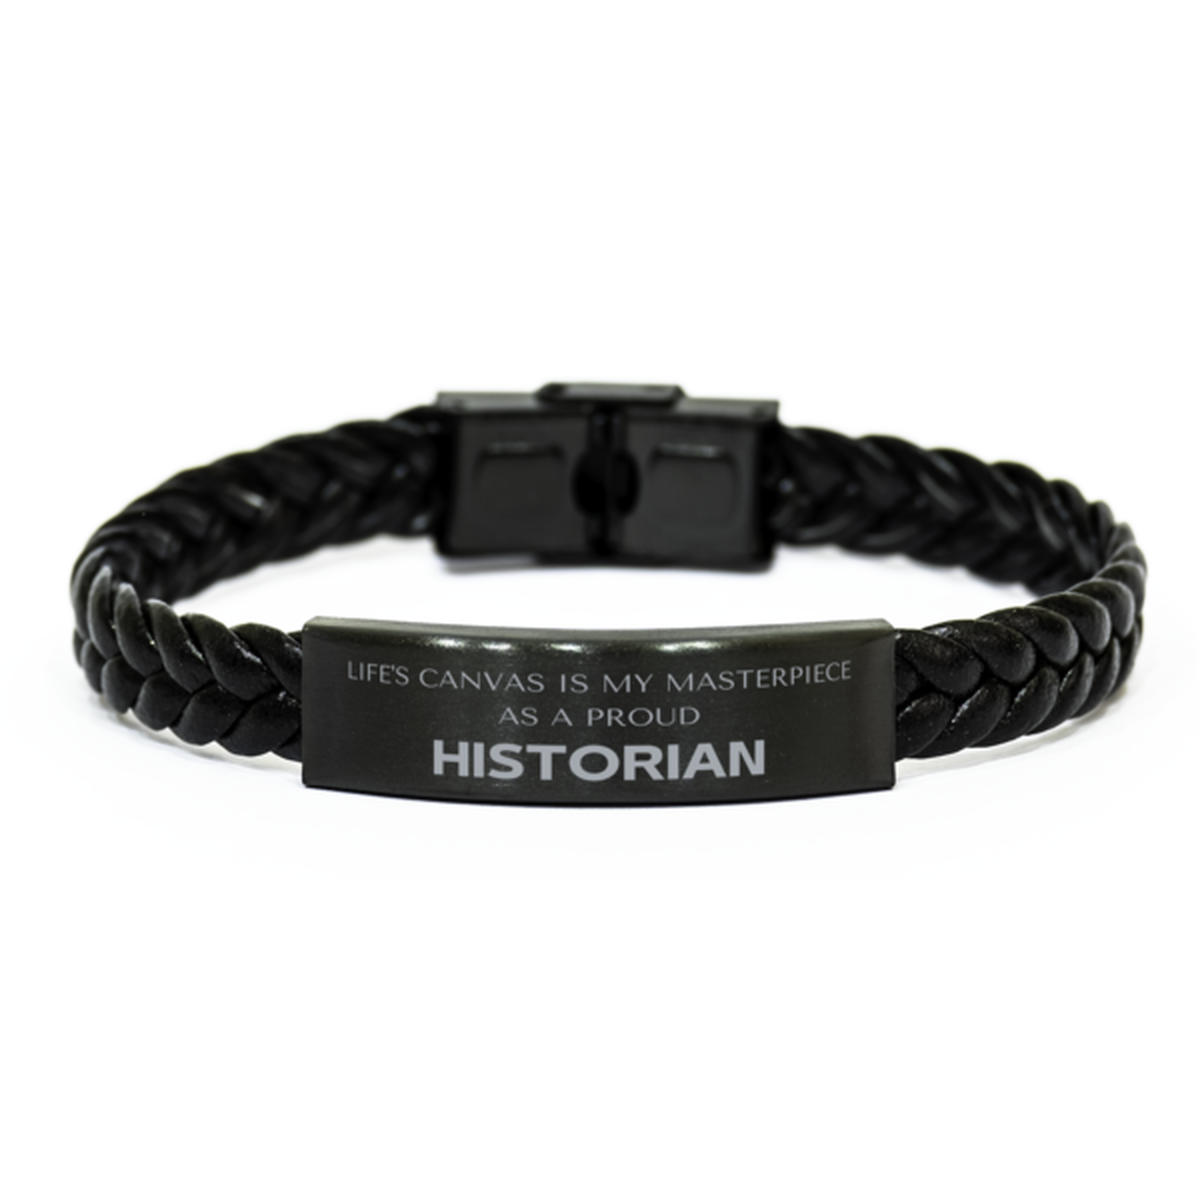 Proud Historian Gifts, Life's canvas is my masterpiece, Epic Birthday Christmas Unique Braided Leather Bracelet For Historian, Coworkers, Men, Women, Friends